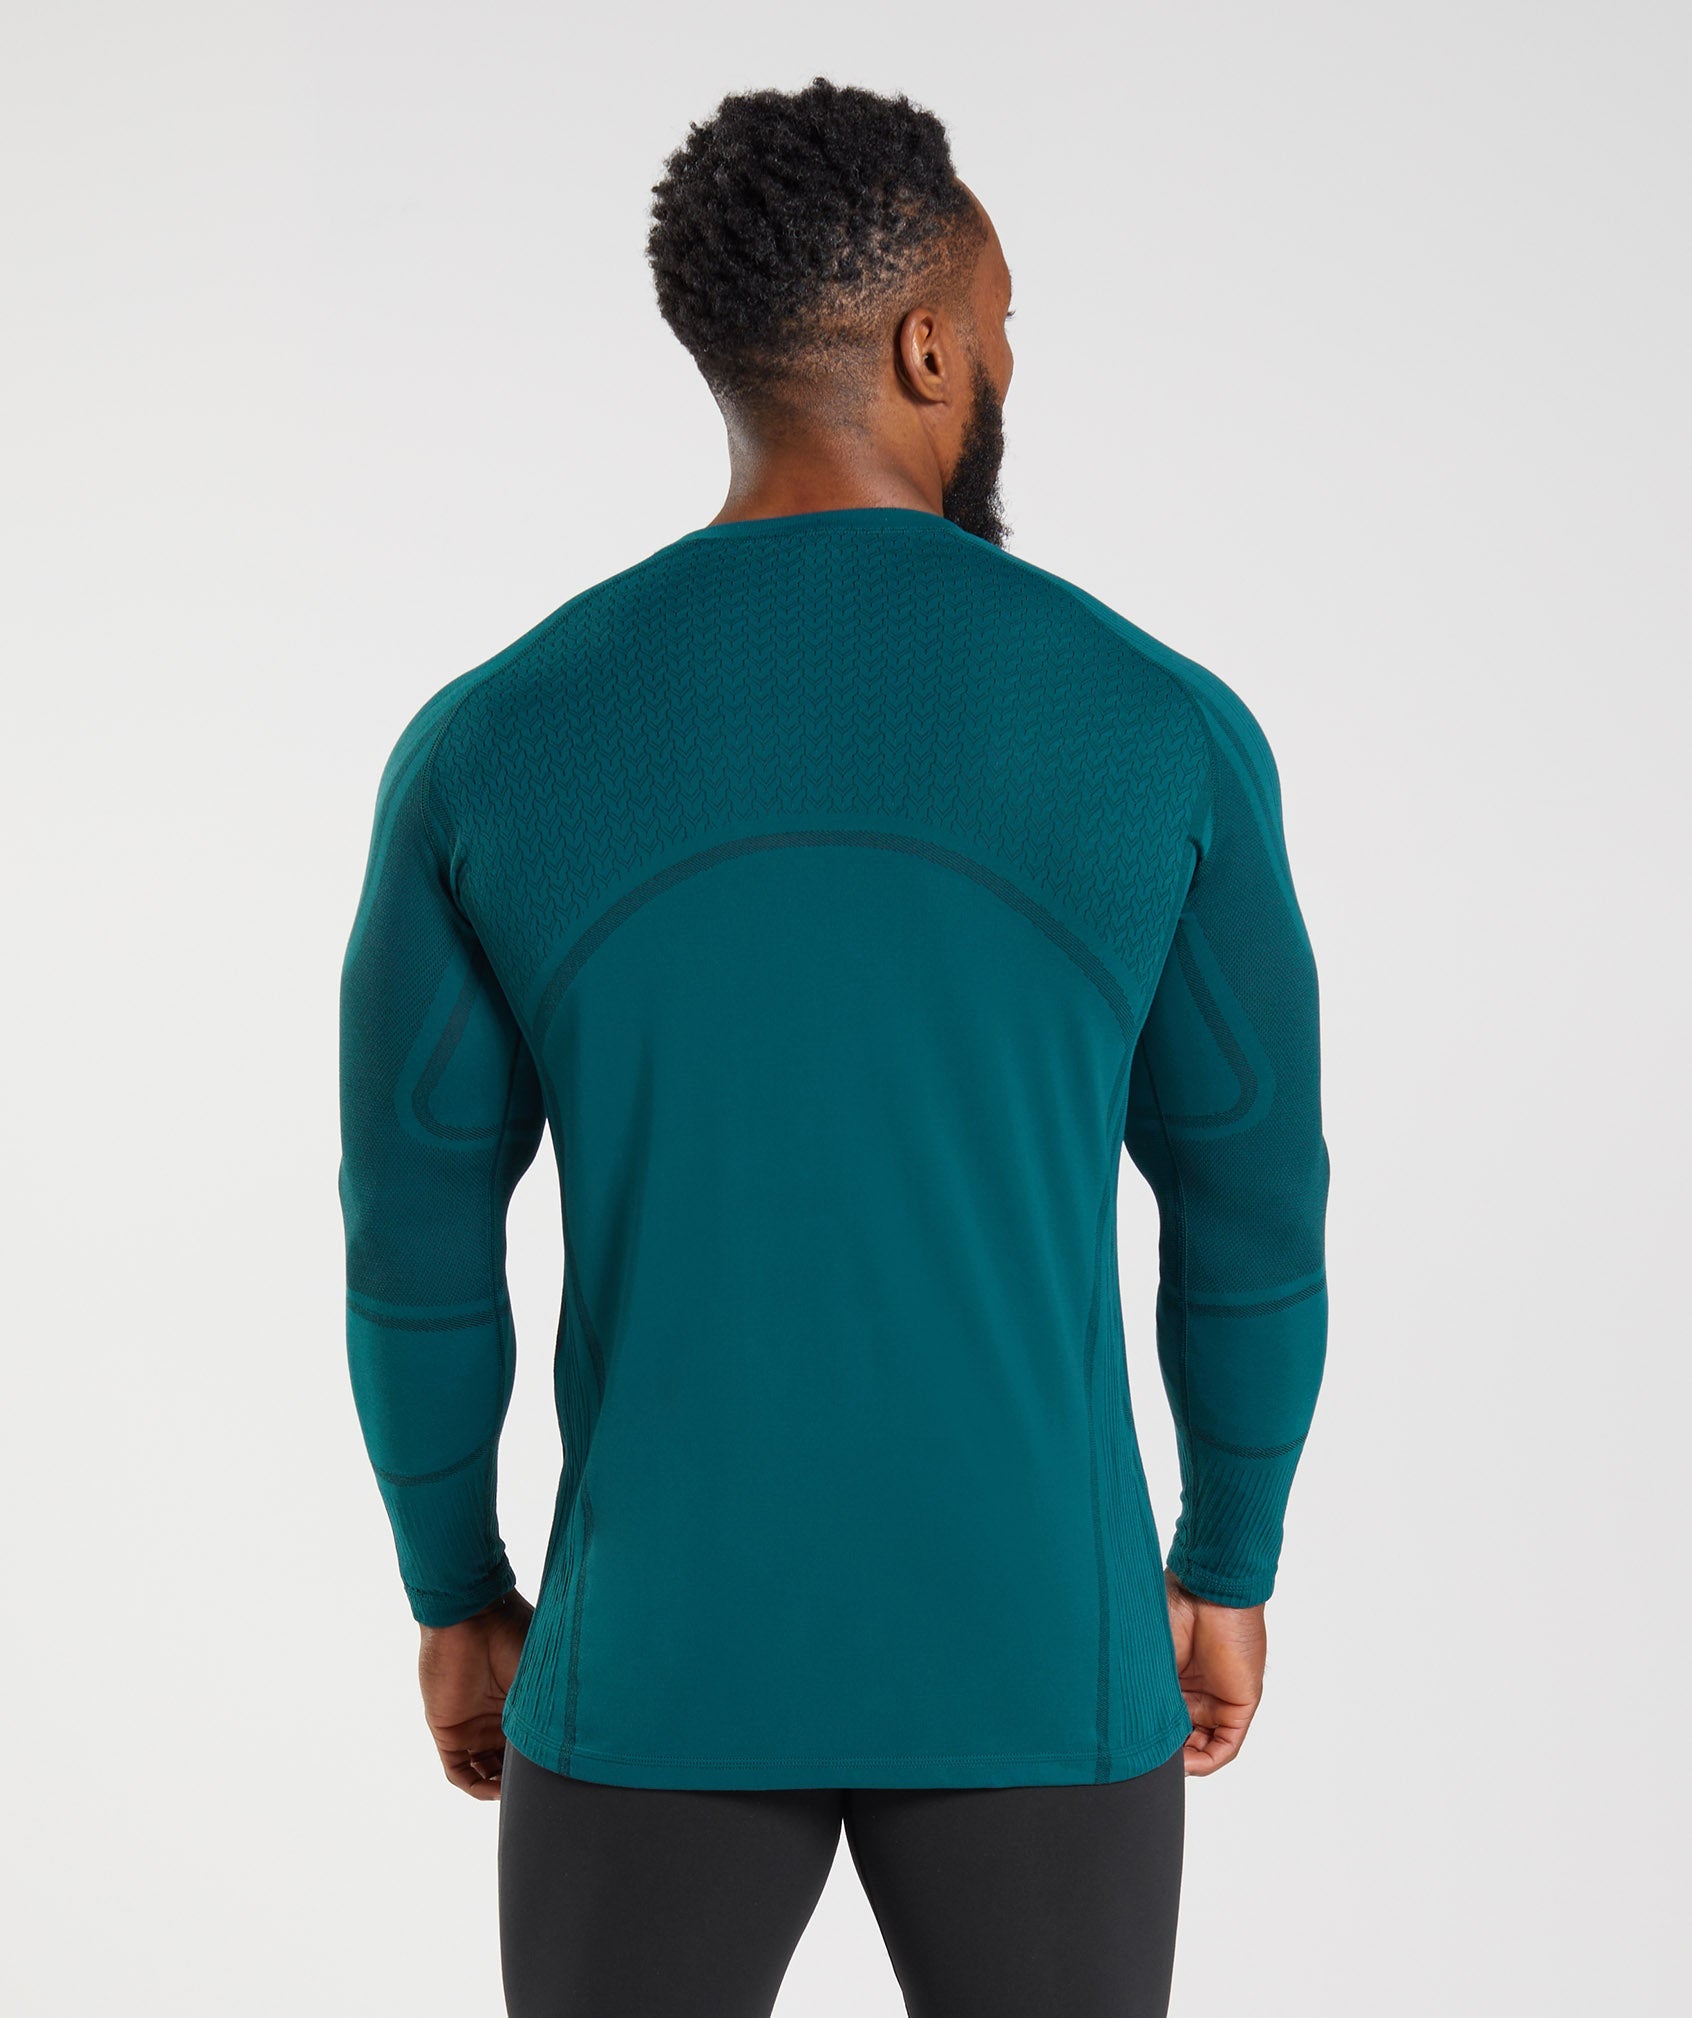 315 LS Seamless T-Shirt in Winter Teal/Black - view 2